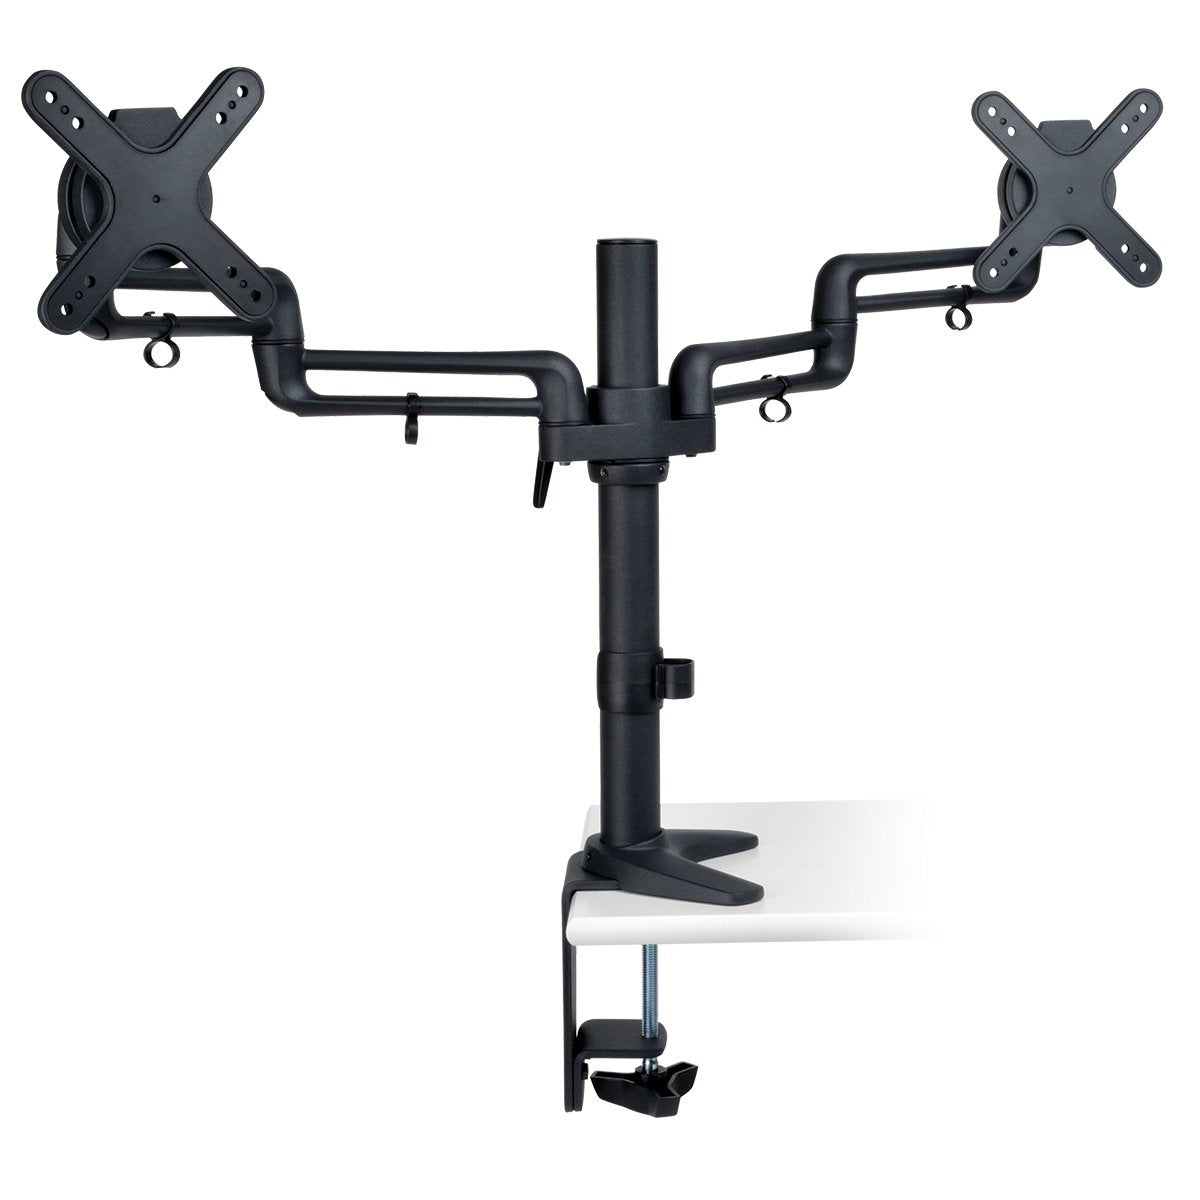 Tripp Lite Dual Full Motion Flexible Arm Desk Clamp for 13" to 27" Monitors